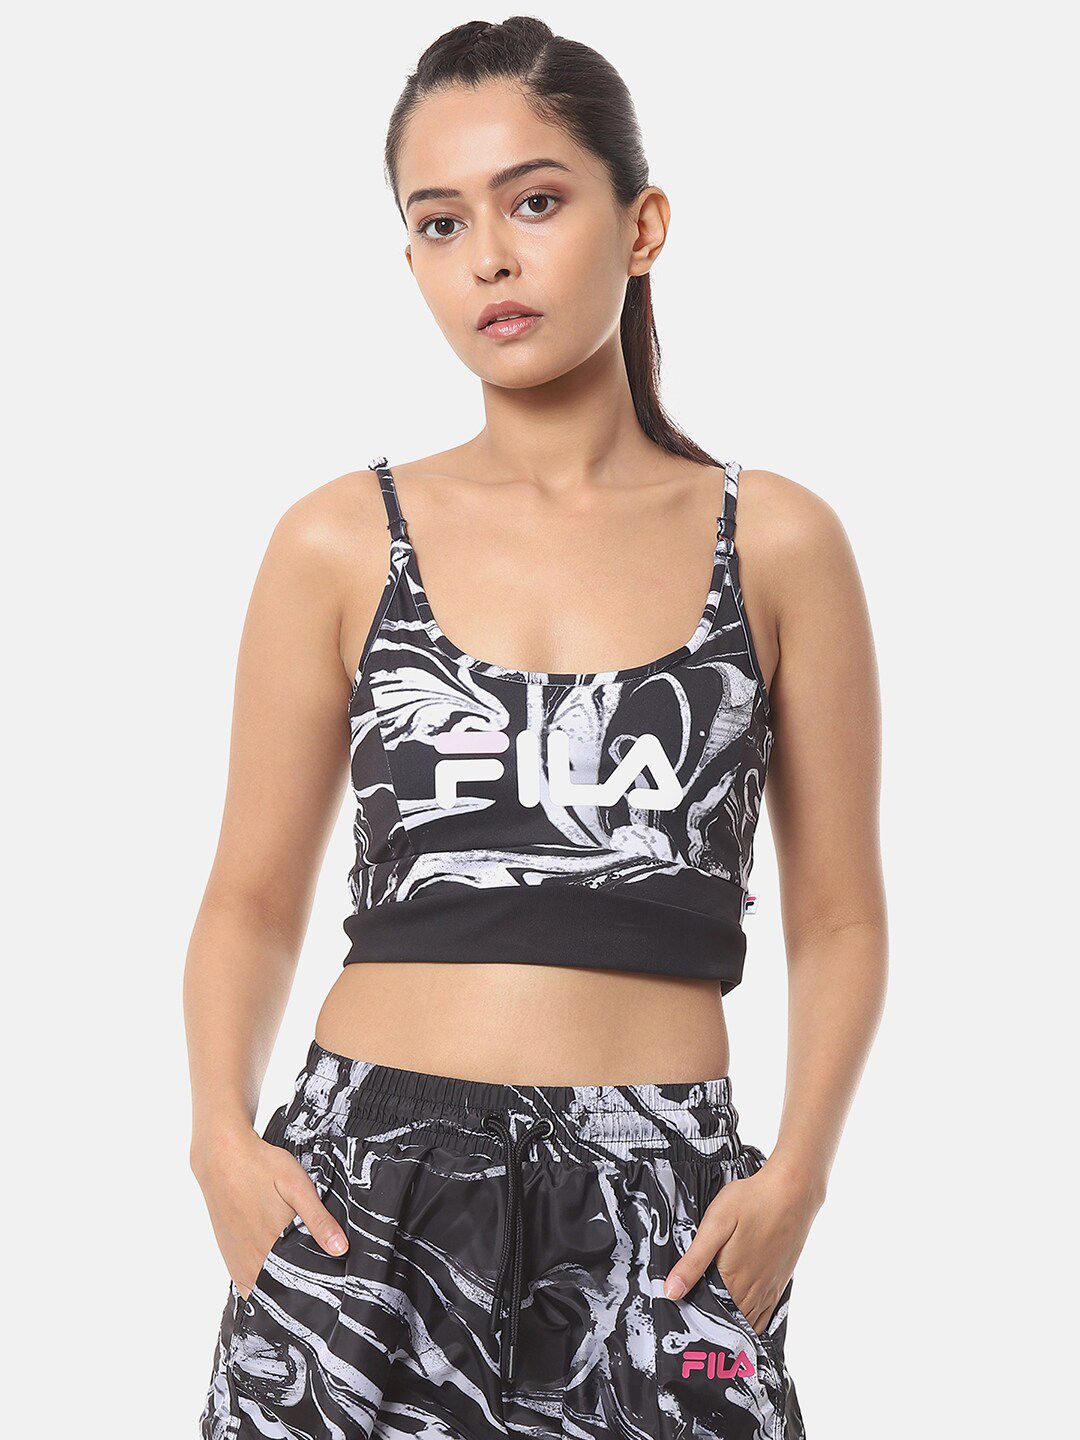 FILA Black & White Abstract Workout Bra Full Coverage Price in India